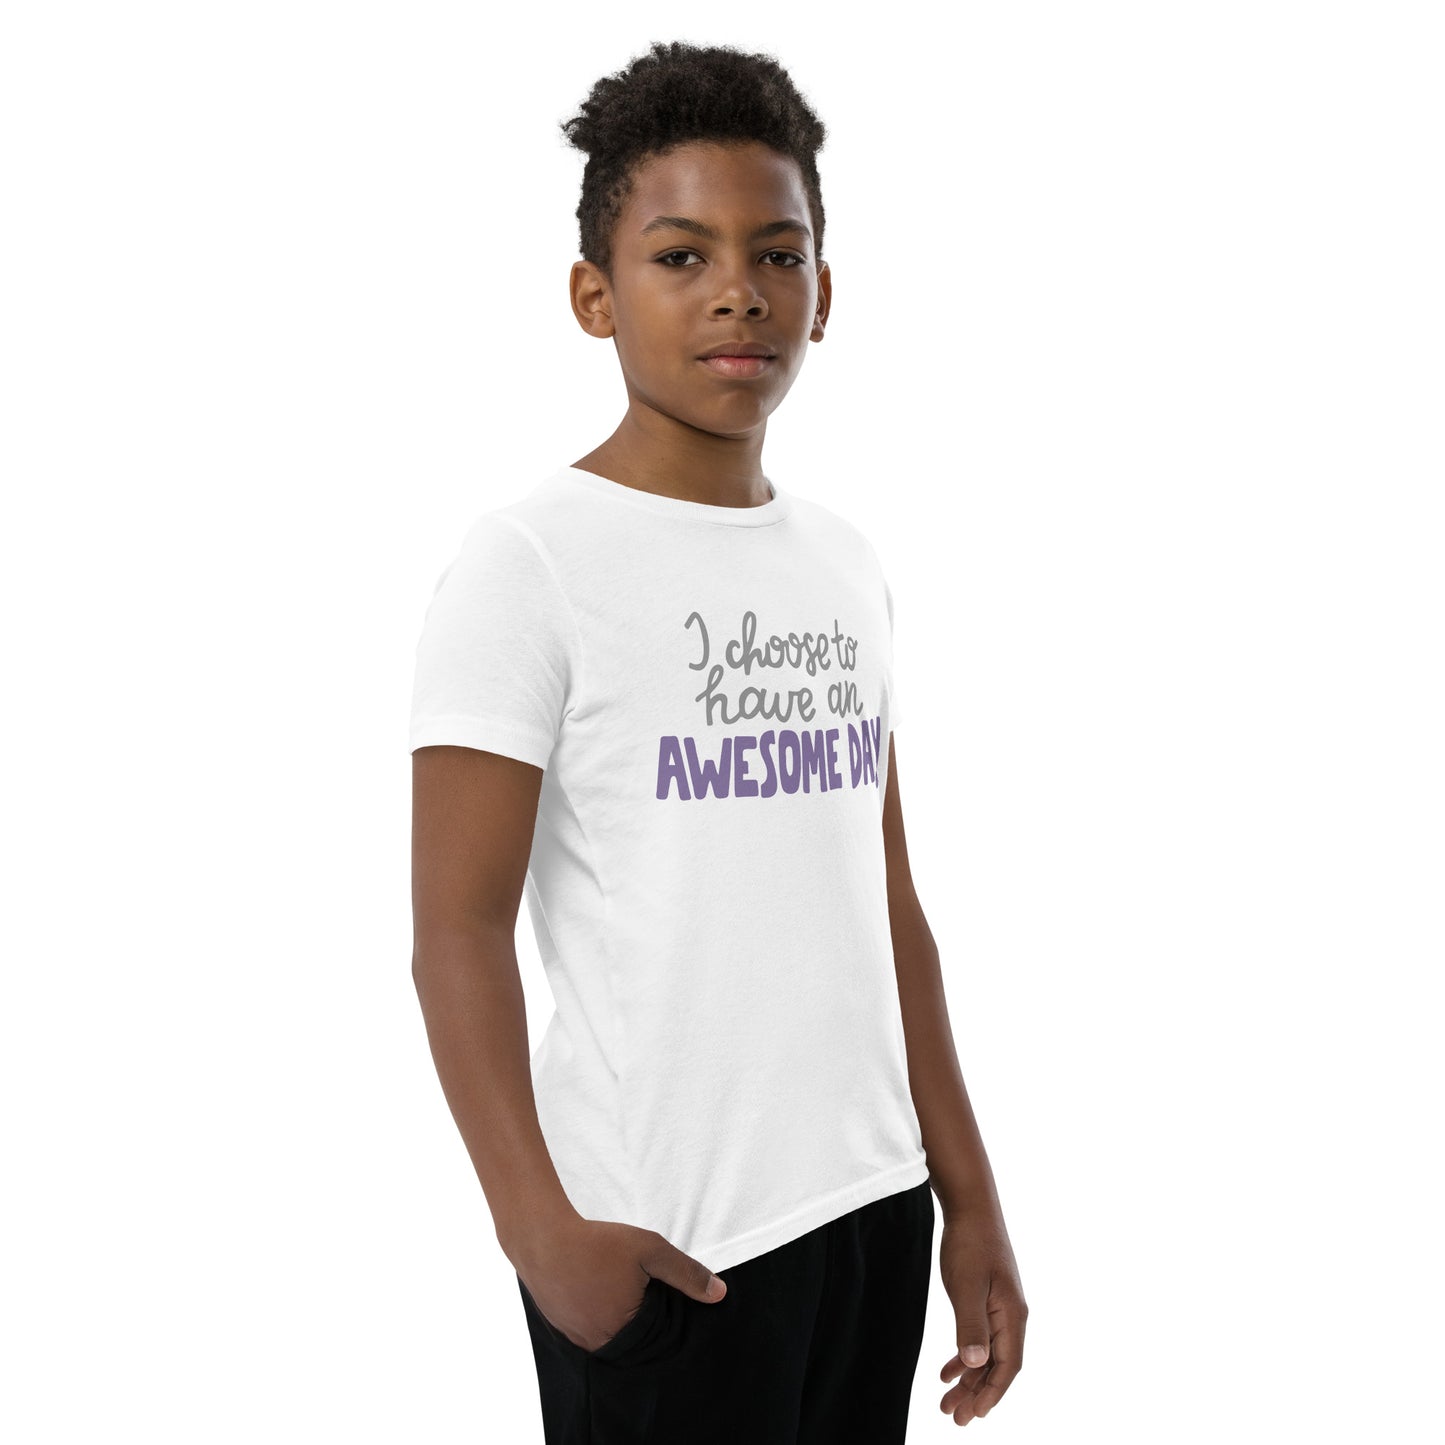 Awesome Day | Motivational | Youth Short Sleeve T-Shirt